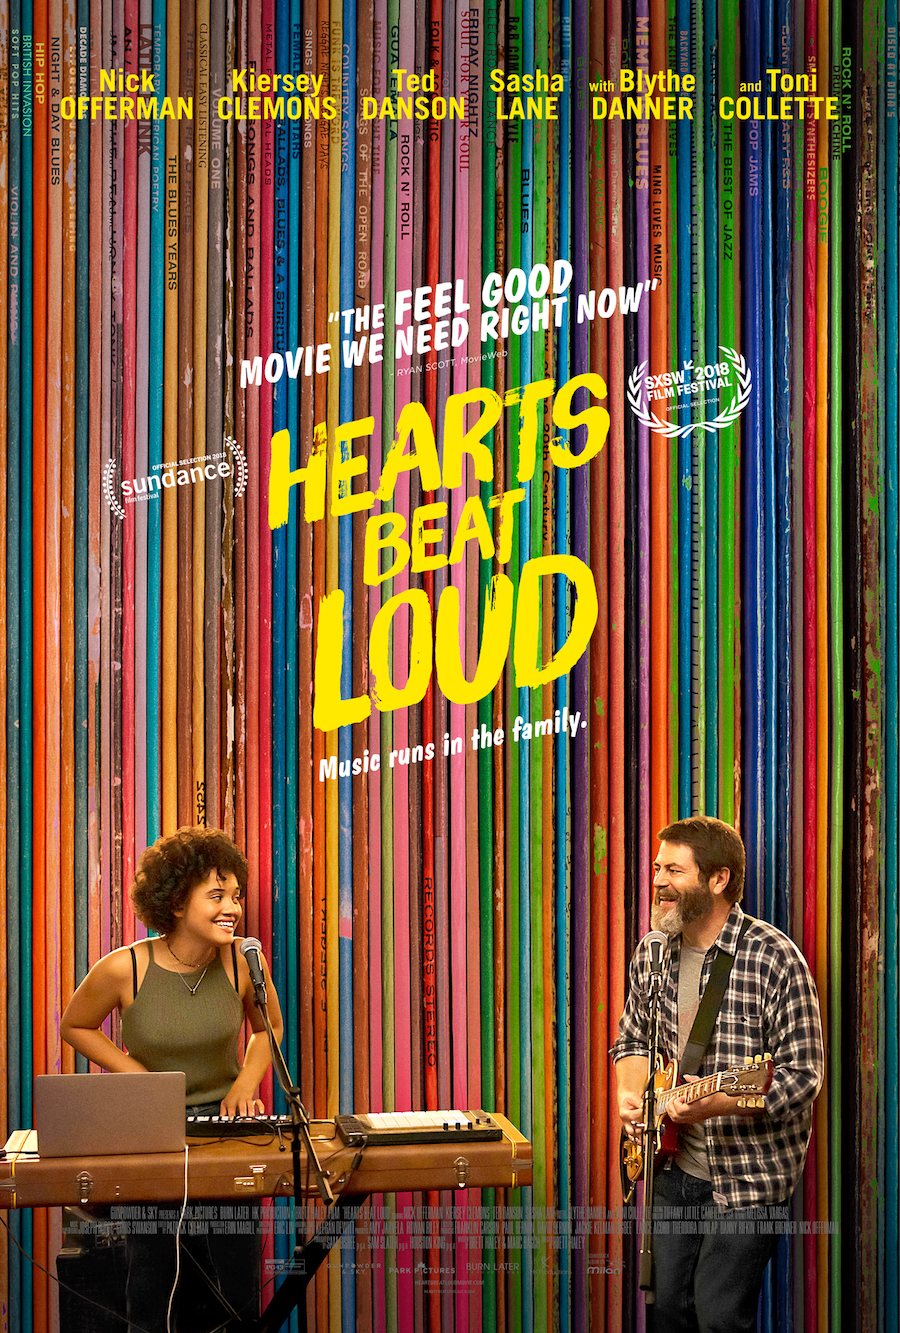 QueerEvents.ca - Film Listing - Hearts Beat Loud Poster